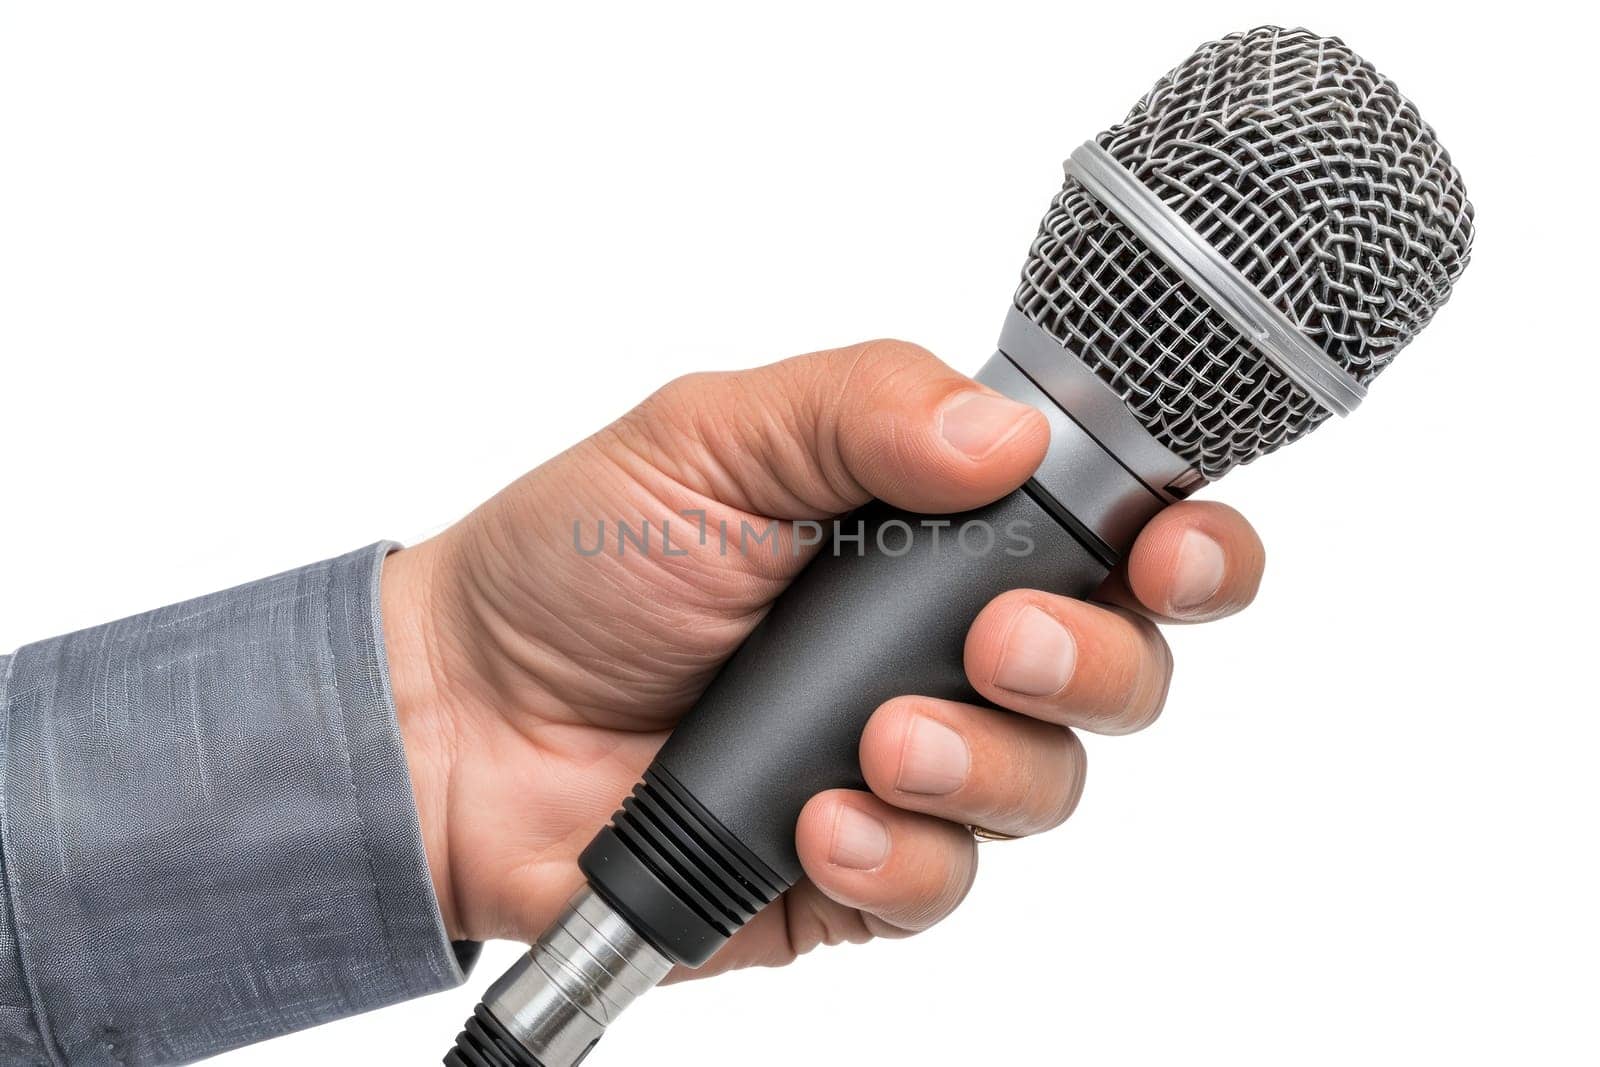 A microphone is being held by a person's hand. The microphone is silver and black. The person is holding the microphone in a way that it is facing forward